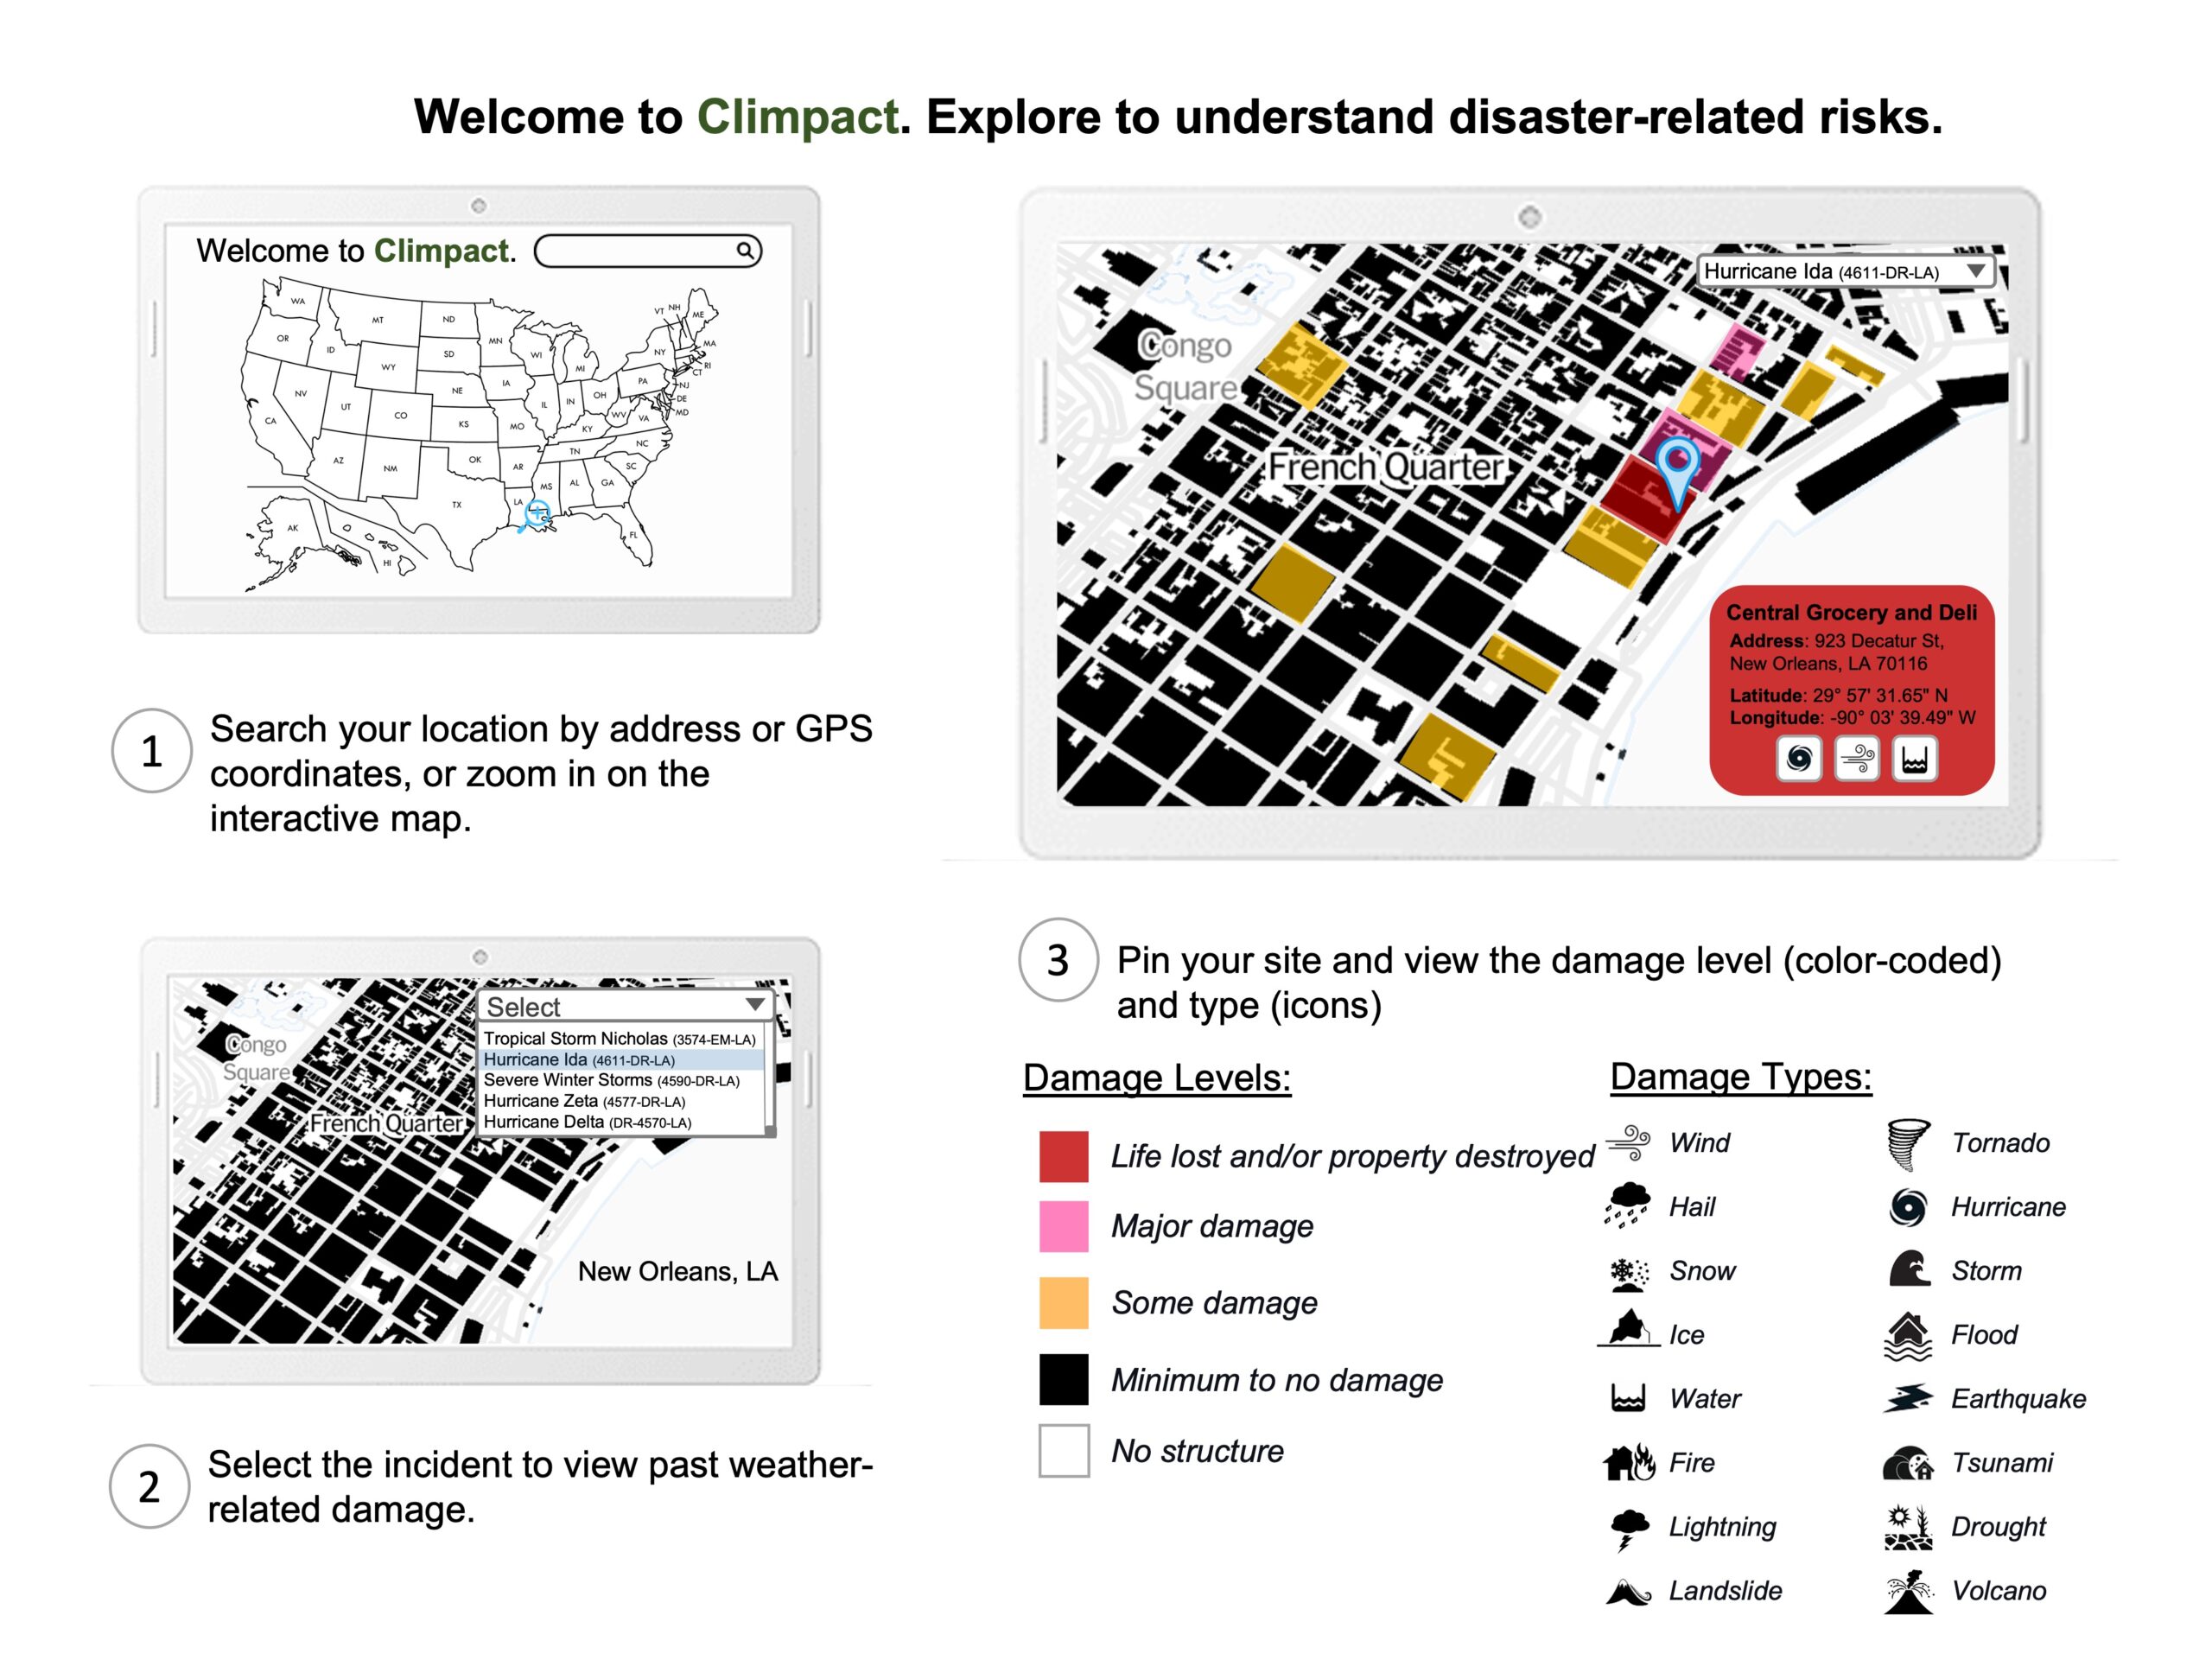 Climpact is an interactive mapping system that allows users to view locations and determine the impact of damage from past major weather-related disasters. I used data from open building footprints datasets in the UnitedStates. I looked at FEMA for data on natural disasters from 1953 to today. FEMA also shows information on support provided and scale of damage for natural disasters. In Climpact, you can select a location to update the map and display sites in the area and a related disaster list. Picking an incident refreshes the map to reflect the level and type of damage with color coding and icons. For example, choosing Hurricane Ida shows Central Grocery in red with the relevant icons. Users worldwide can make better decisions on where to live, study, work, and visit. Businesses and governments can determine where to invest and promote growth. They can also help deter people from moving to a specific area. Climpact increases climate change awareness by allowing users to interact easily with geospatial and weather event data.